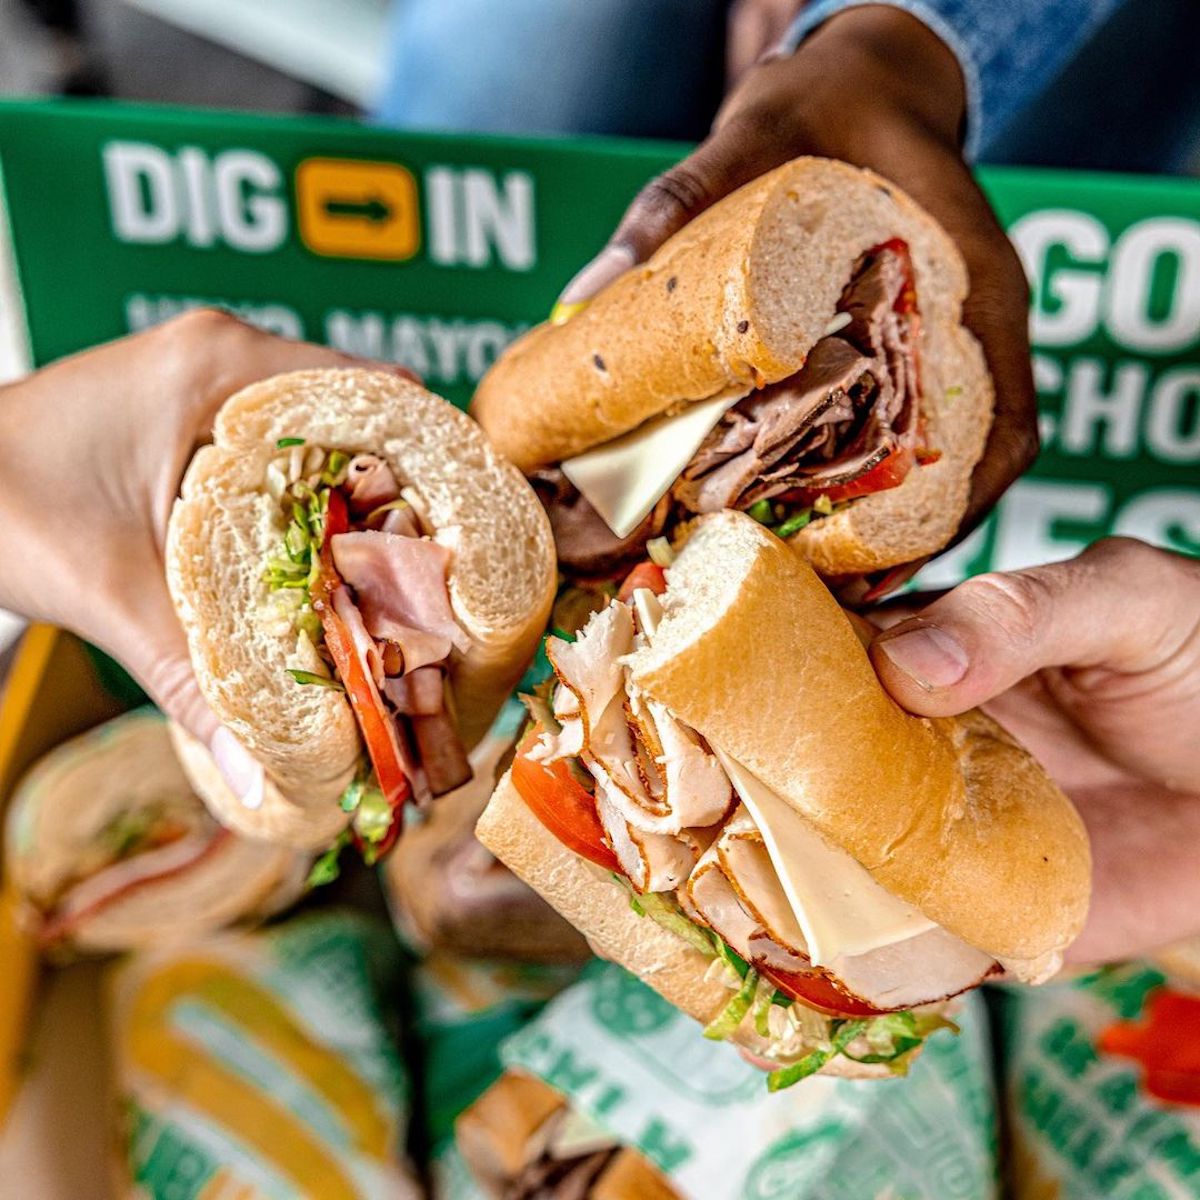 Lehigh Valley to See Two New Subway Restaurants Through Next Year